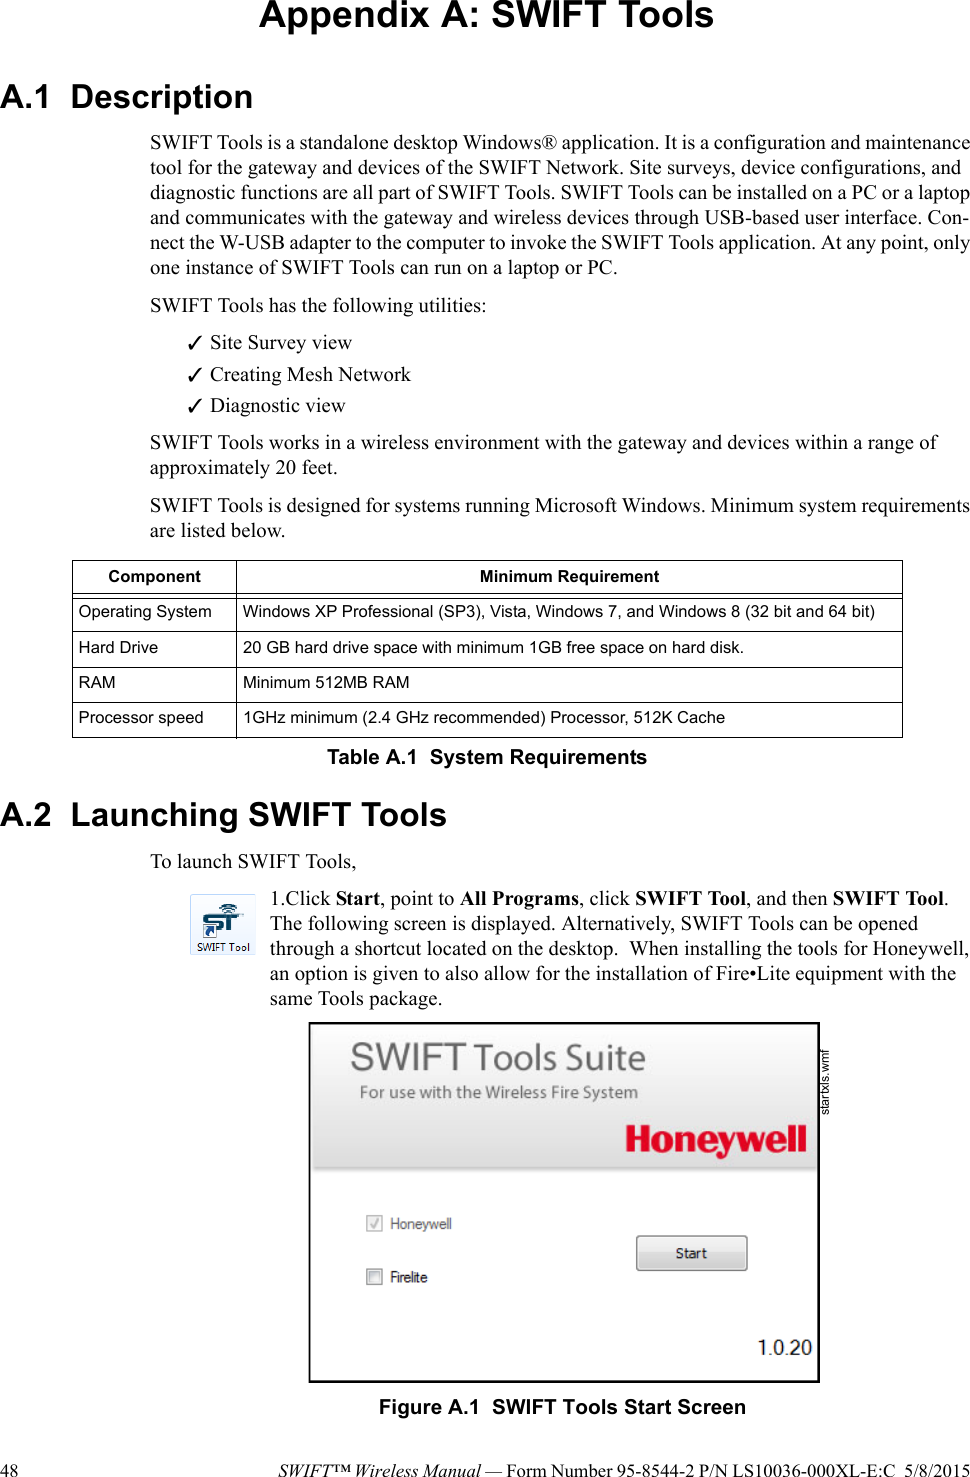 48 SWIFT™ Wireless Manual — Form Number 95-8544-2 P/N LS10036-000XL-E:C  5/8/2015 Appendix A: SWIFT ToolsA.1  DescriptionSWIFT Tools is a standalone desktop Windows® application. It is a configuration and maintenance tool for the gateway and devices of the SWIFT Network. Site surveys, device configurations, and diagnostic functions are all part of SWIFT Tools. SWIFT Tools can be installed on a PC or a laptop and communicates with the gateway and wireless devices through USB-based user interface. Con-nect the W-USB adapter to the computer to invoke the SWIFT Tools application. At any point, only one instance of SWIFT Tools can run on a laptop or PC.SWIFT Tools has the following utilities:Site Survey viewCreating Mesh NetworkDiagnostic viewSWIFT Tools works in a wireless environment with the gateway and devices within a range of approximately 20 feet.SWIFT Tools is designed for systems running Microsoft Windows. Minimum system requirements are listed below. A.2  Launching SWIFT ToolsTo launch SWIFT Tools,1.Click Start, point to All Programs, click SWIFT Tool, and then SWIFT Tool. The following screen is displayed. Alternatively, SWIFT Tools can be opened through a shortcut located on the desktop.  When installing the tools for Honeywell, an option is given to also allow for the installation of Fire•Lite equipment with the same Tools package.                                 Component Minimum RequirementOperating System Windows XP Professional (SP3), Vista, Windows 7, and Windows 8 (32 bit and 64 bit)Hard Drive 20 GB hard drive space with minimum 1GB free space on hard disk.RAM Minimum 512MB RAMProcessor speed 1GHz minimum (2.4 GHz recommended) Processor, 512K CacheTable A.1  System Requirementsstartxls.wmfFigure A.1  SWIFT Tools Start Screen